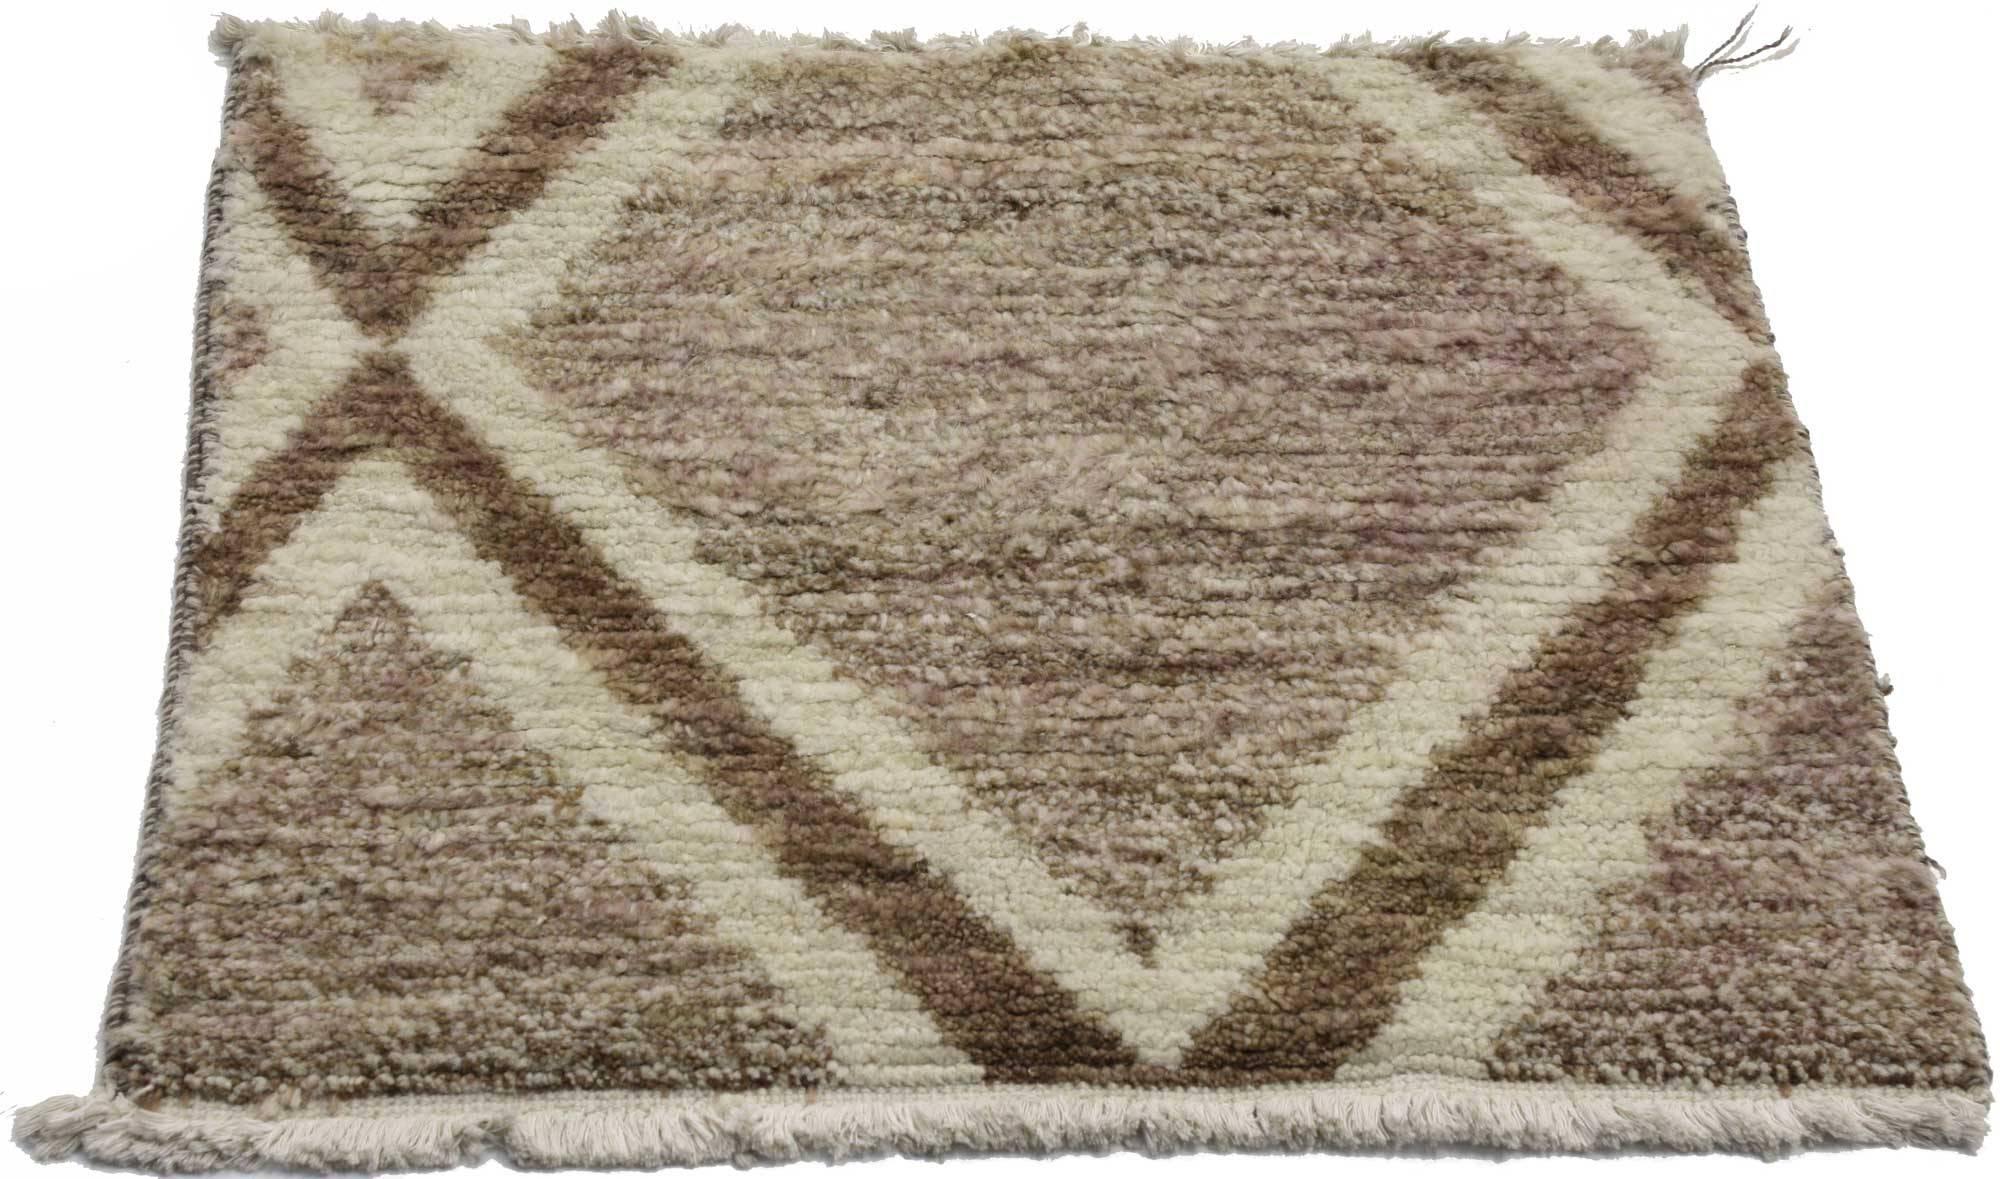 76722, contemporary Moroccan style Accent rug, square Moroccan rug. This Moroccan style accent rug with modern style features well defined lines creating a lozenge pattern. Clean and simple, this Moroccan style rug combines warmth and comfort with